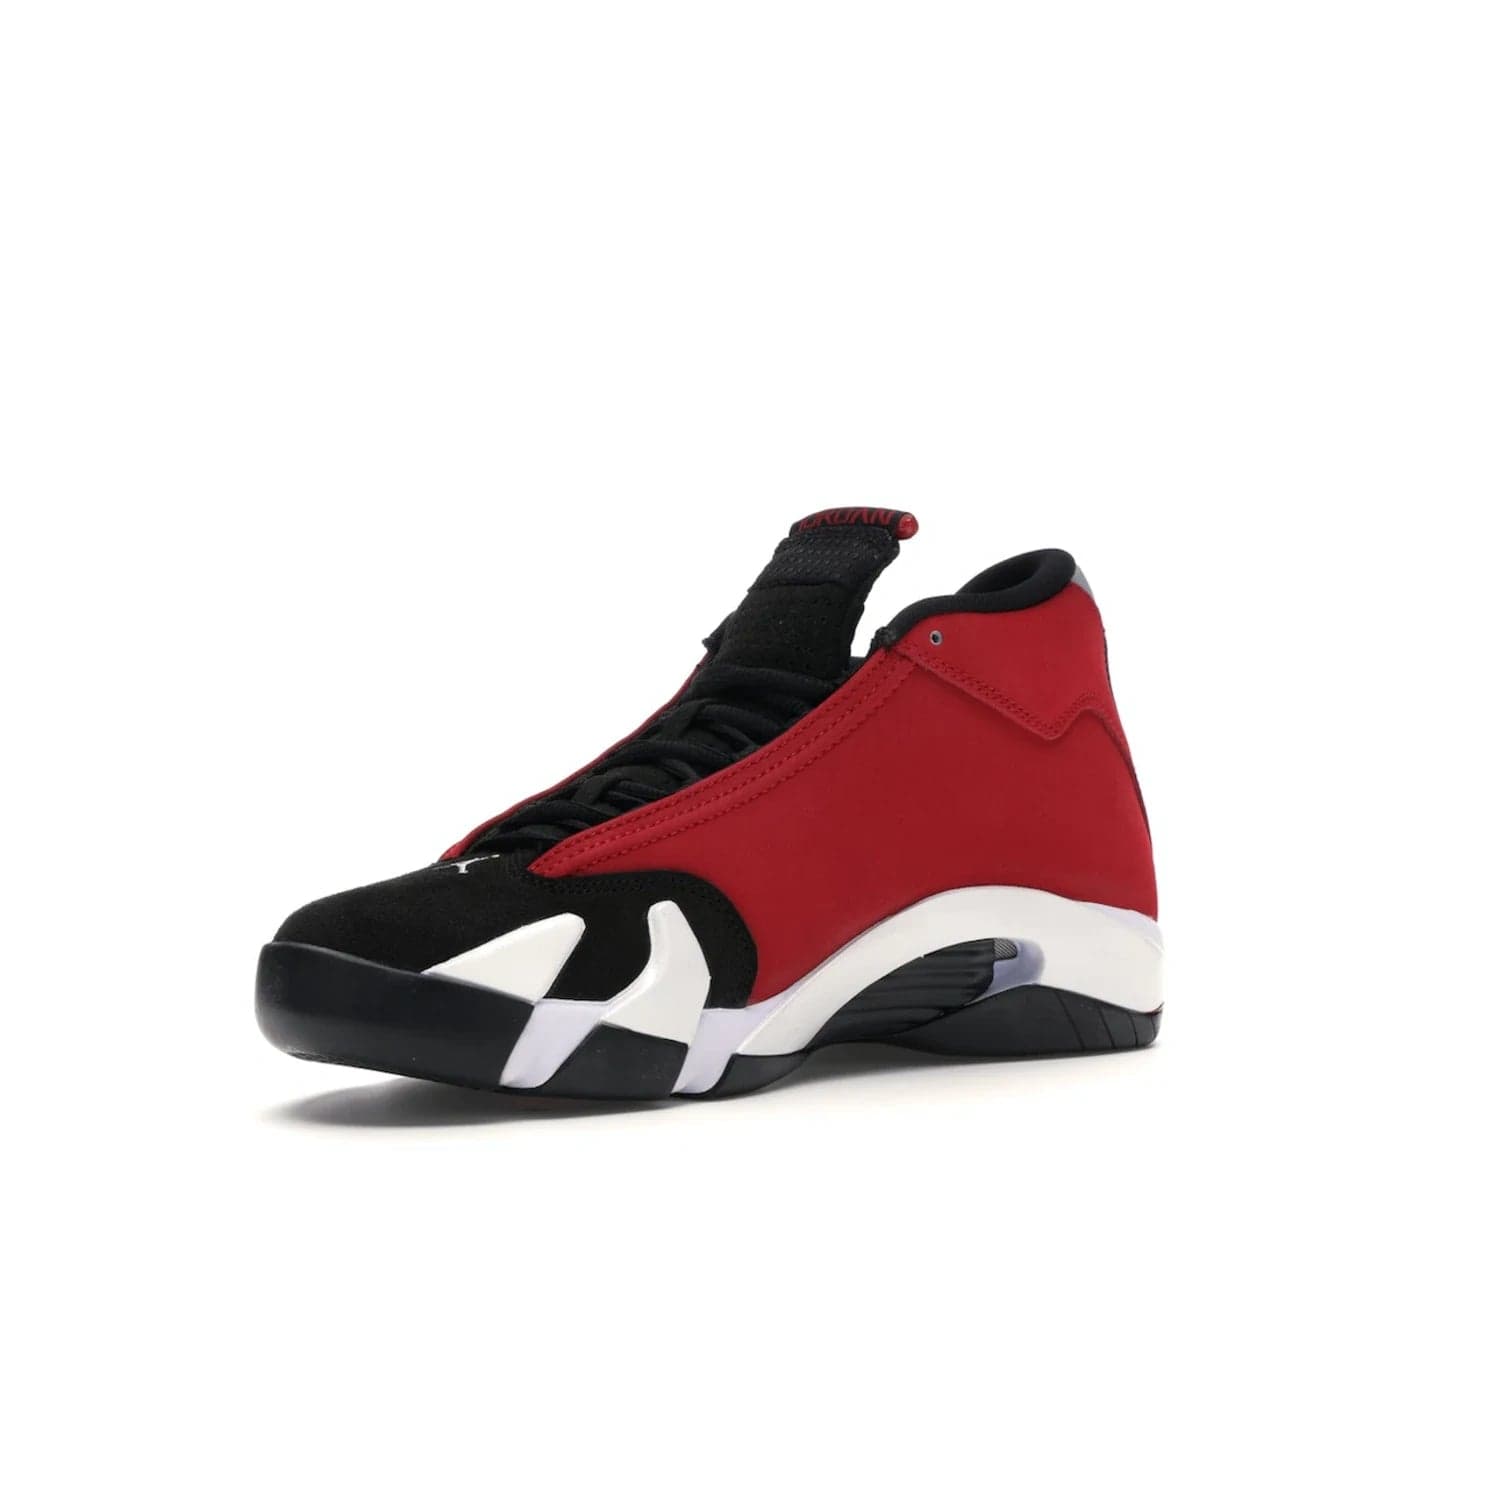 Jordan 14 Retro Gym Red Toro - Image 15 - Only at www.BallersClubKickz.com - Feel the Chicago Bulls energy with the Jordan 14 Retro Gym Red Toro! Black, red, and white design unites performance and fashion. Get your hands on this limited edition Jordan and show off your style today.